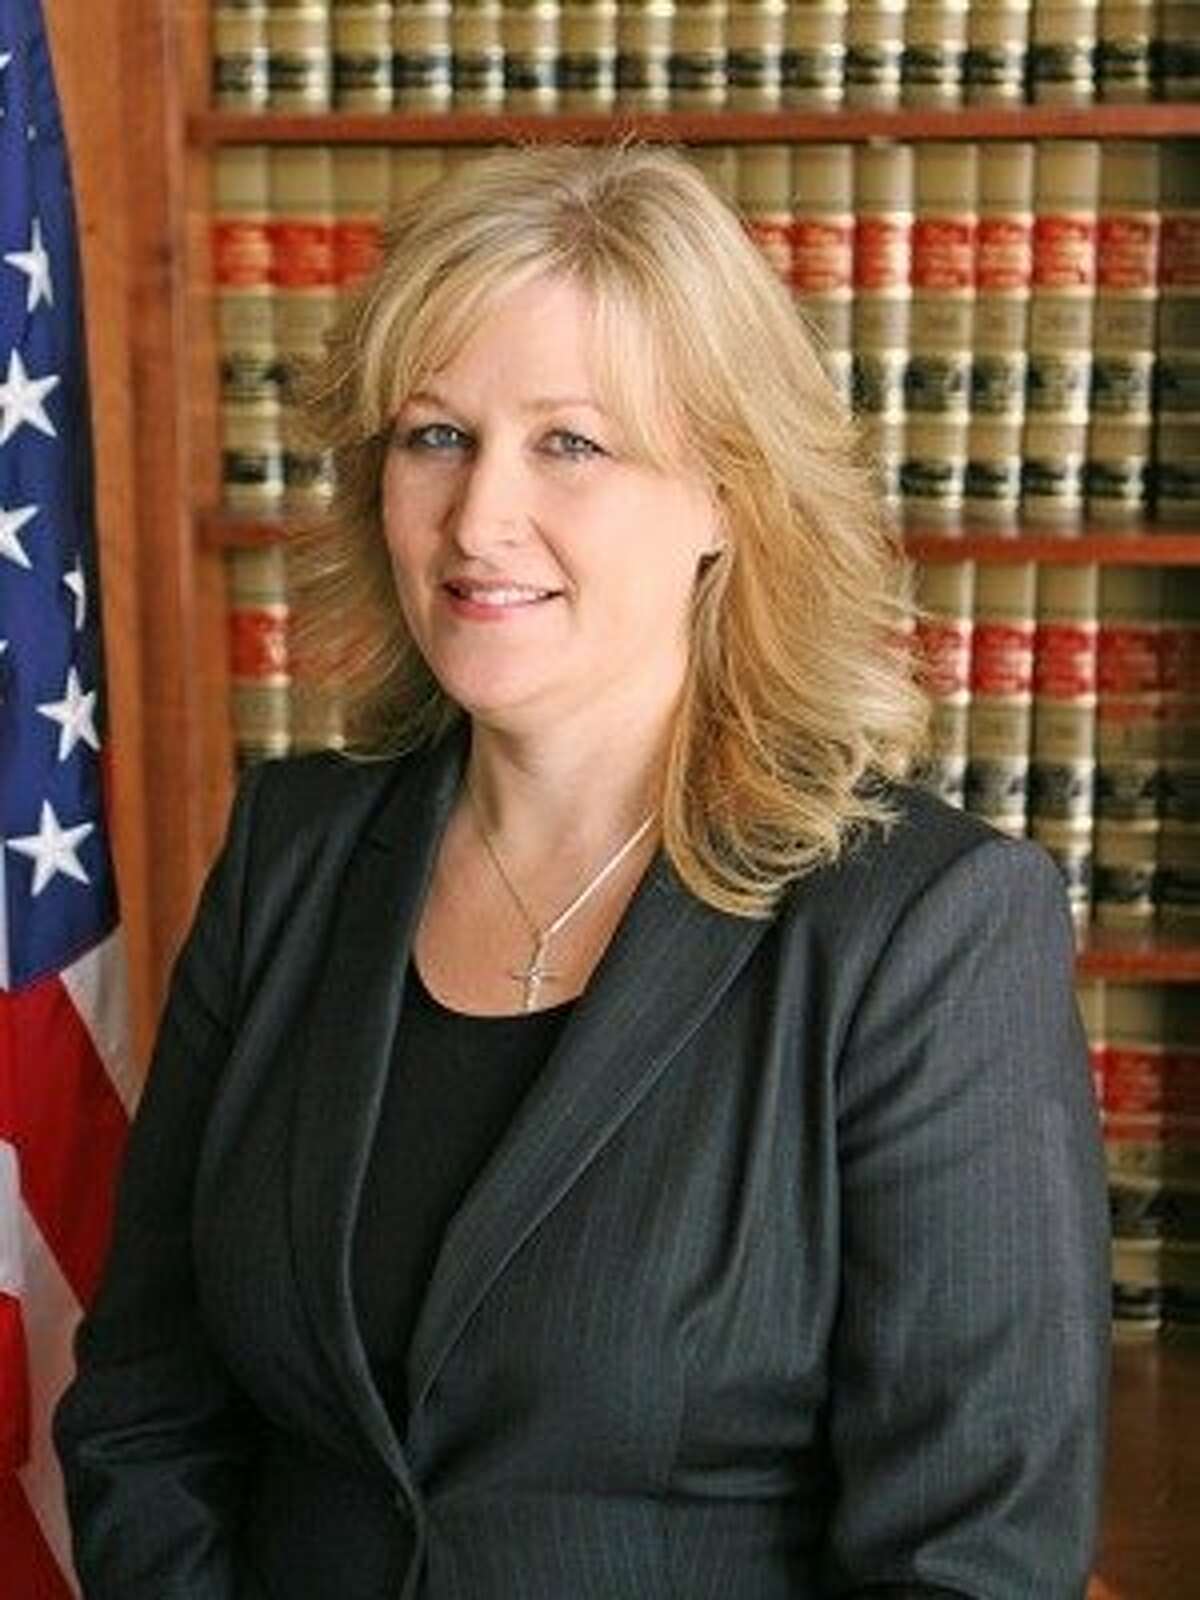 Lori Ajax, 50, of Fair Oaks, has been appointed chief of the Bureau of Medical Marijuana Regulation at the California Department of Consumer Affairs. Ajax has been chief deputy director at the California Department of Alcoholic Beverage Control since 2014, where she has served in several positions since 1995, including deputy division chief, supervising agent in charge and supervising agent.